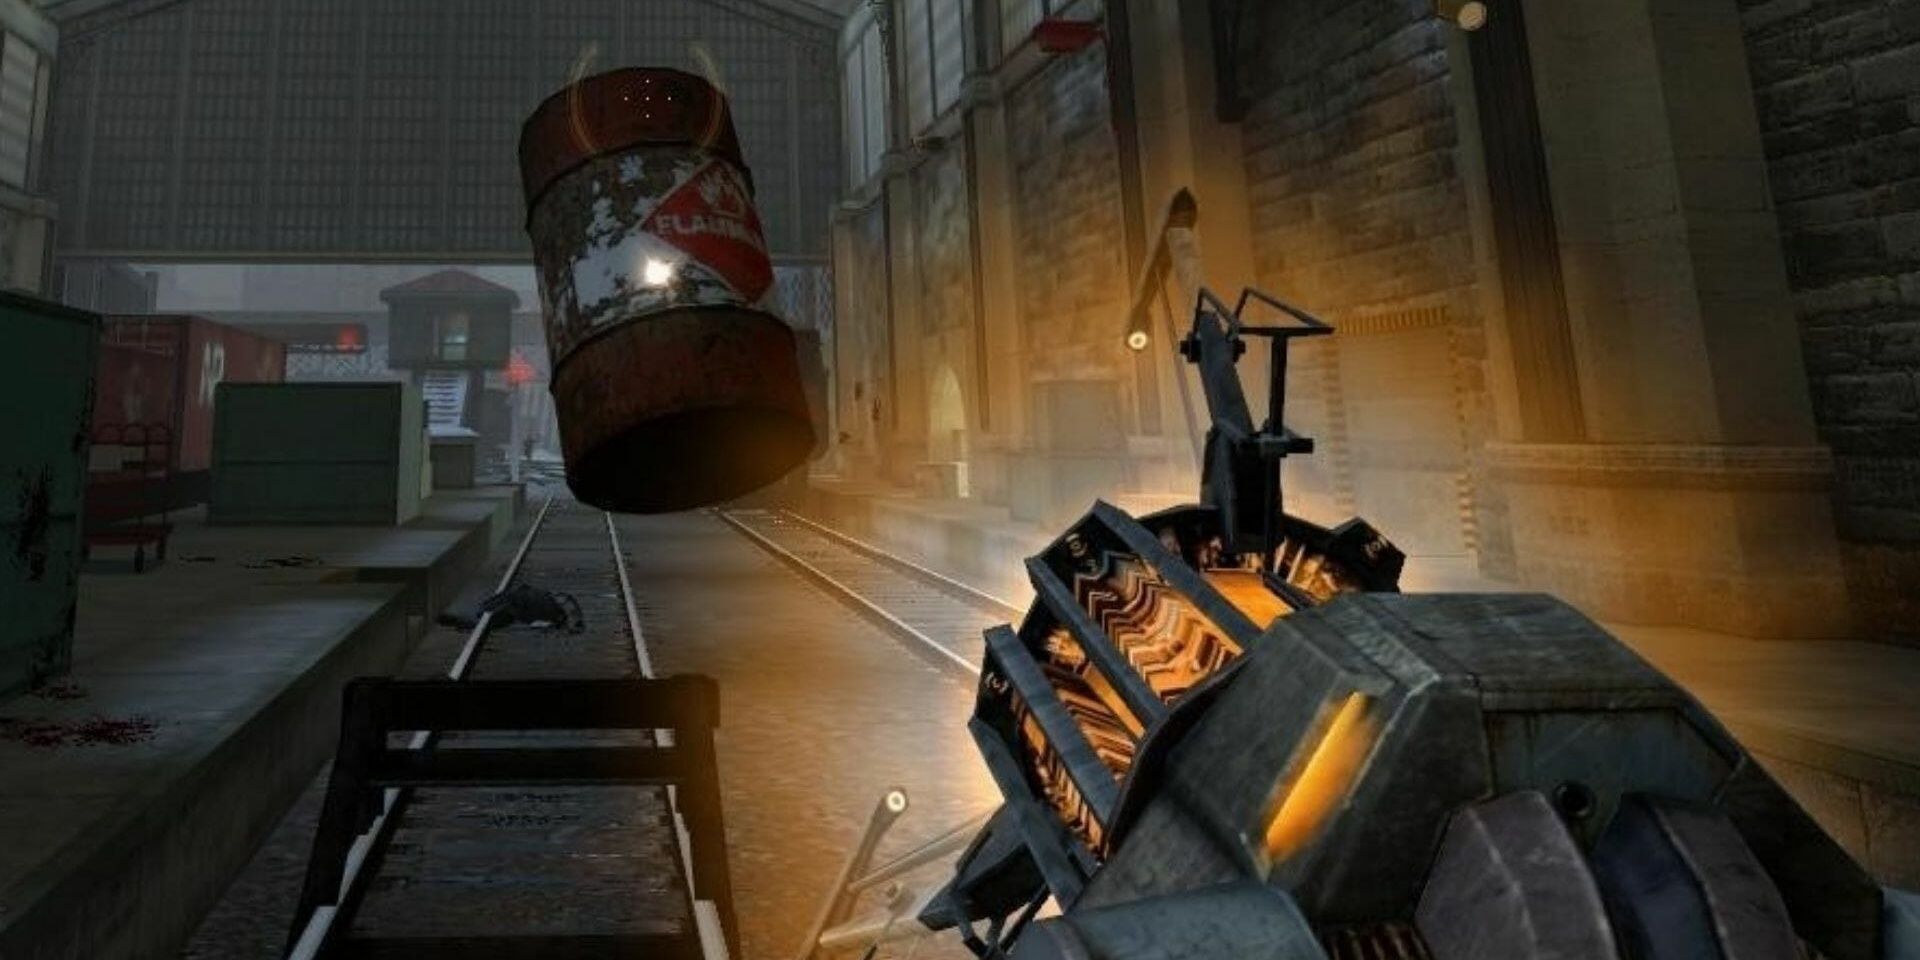 A screenshot showing the gravity gun being used to manipulate an explosive barrel in Half-Life 2